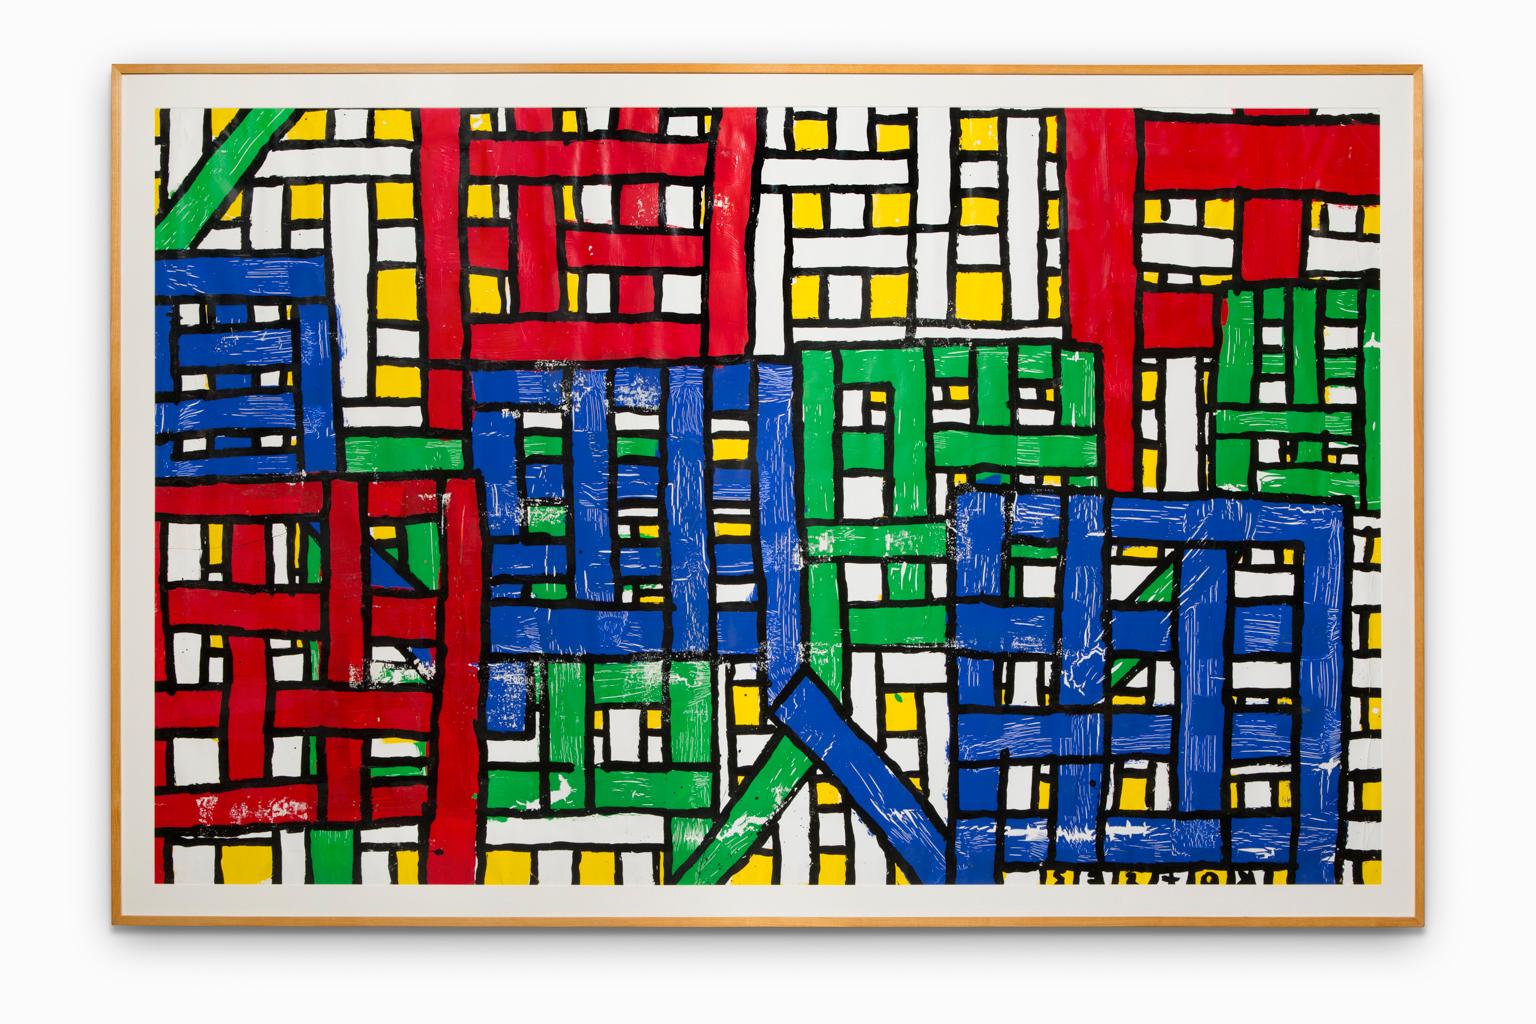 Robert Sestok Abstract Painting - "Untitled", Enamel On Paper, Red, Blue, Green, Yellow, Graphic Design	